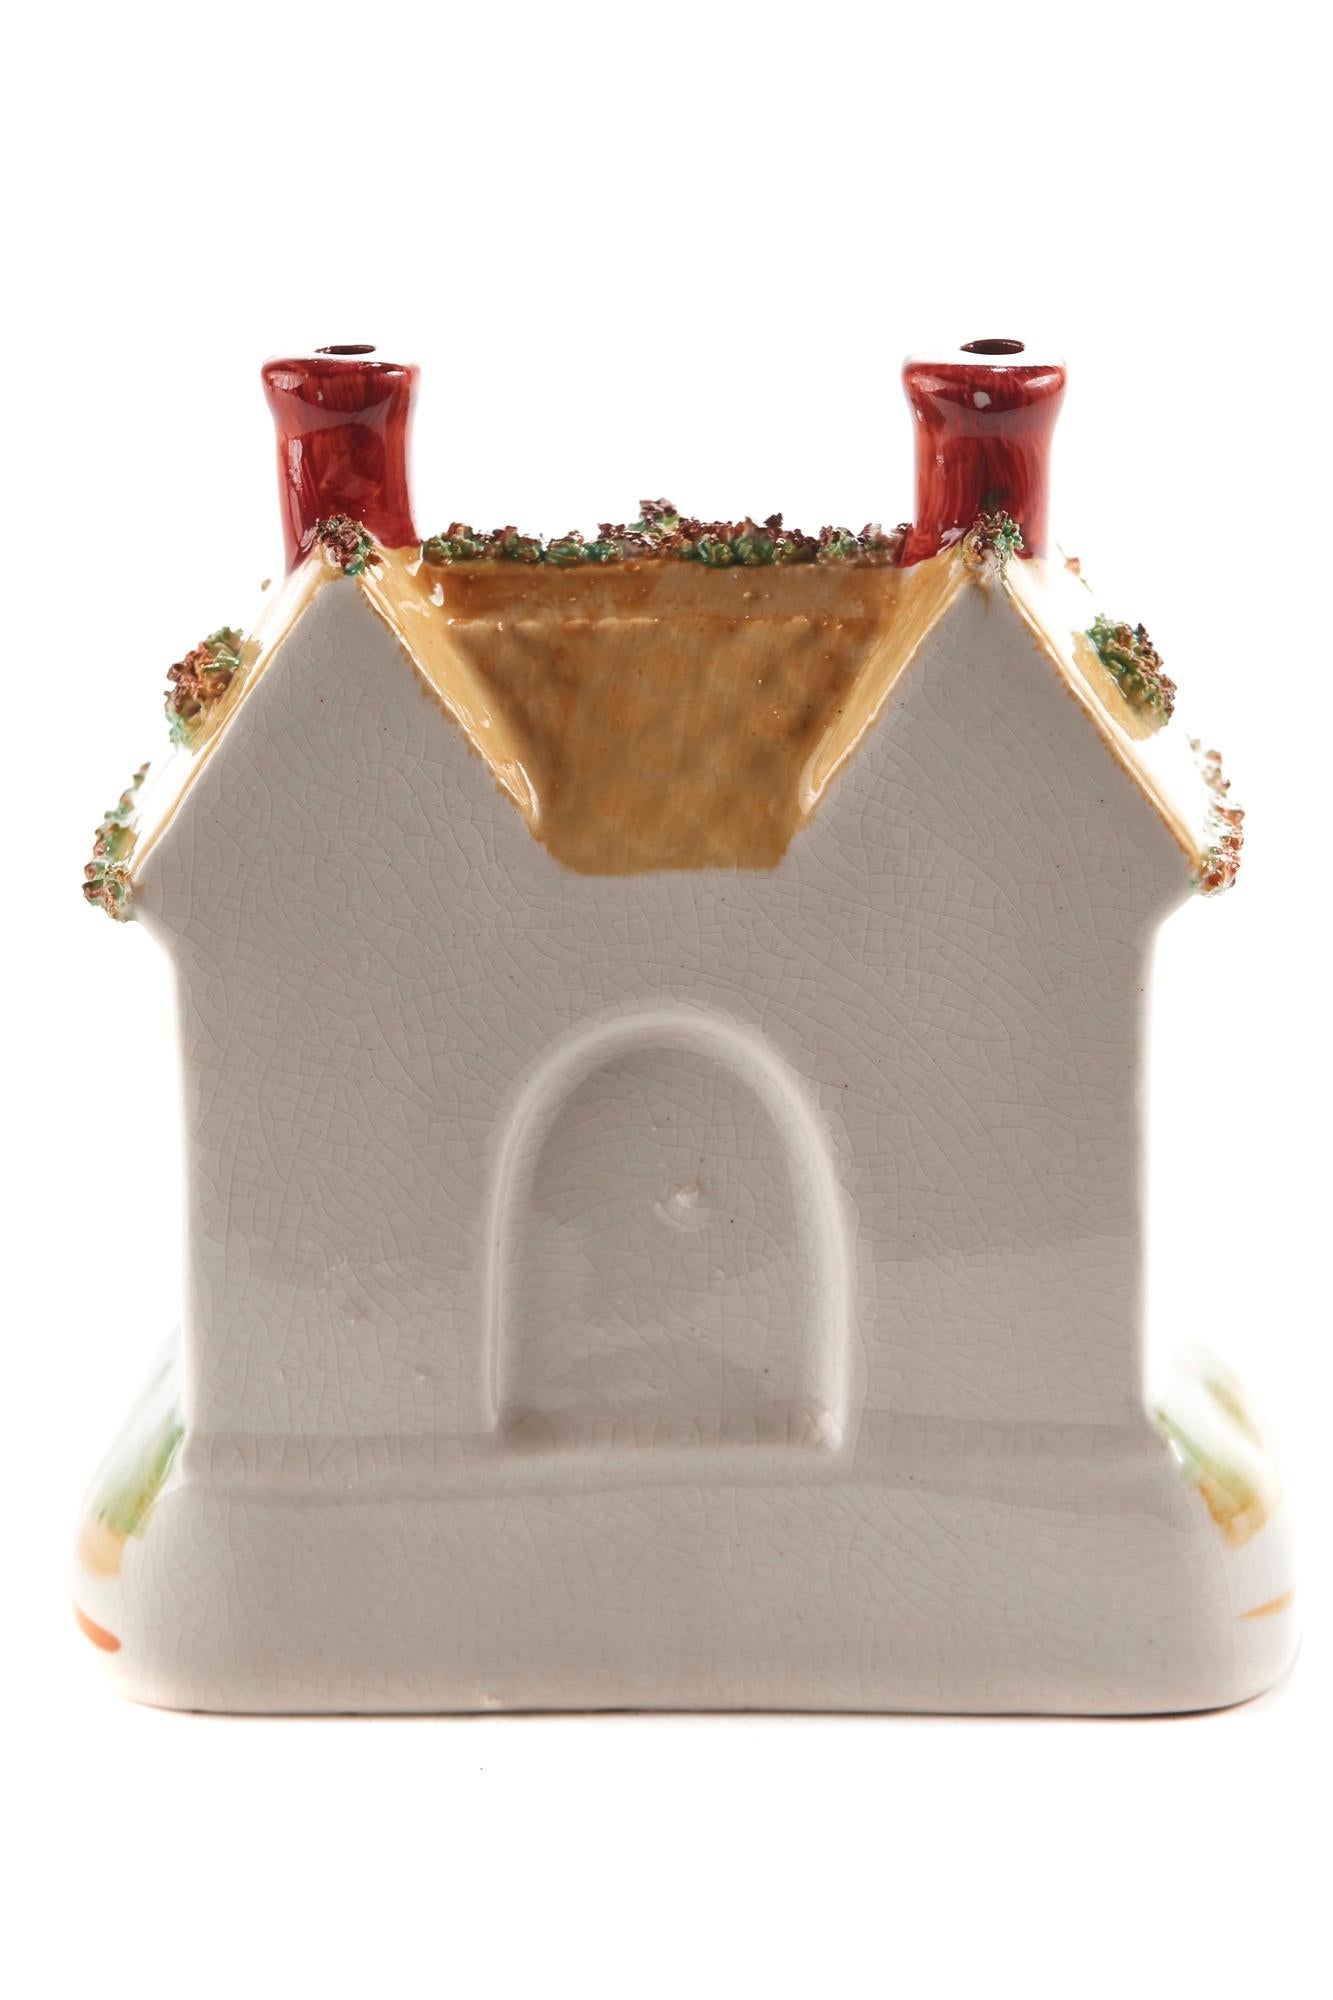 This is an unusual 19th century antique Staffordshire Cottage, lovely colorful cottage. It is in perfect condition.